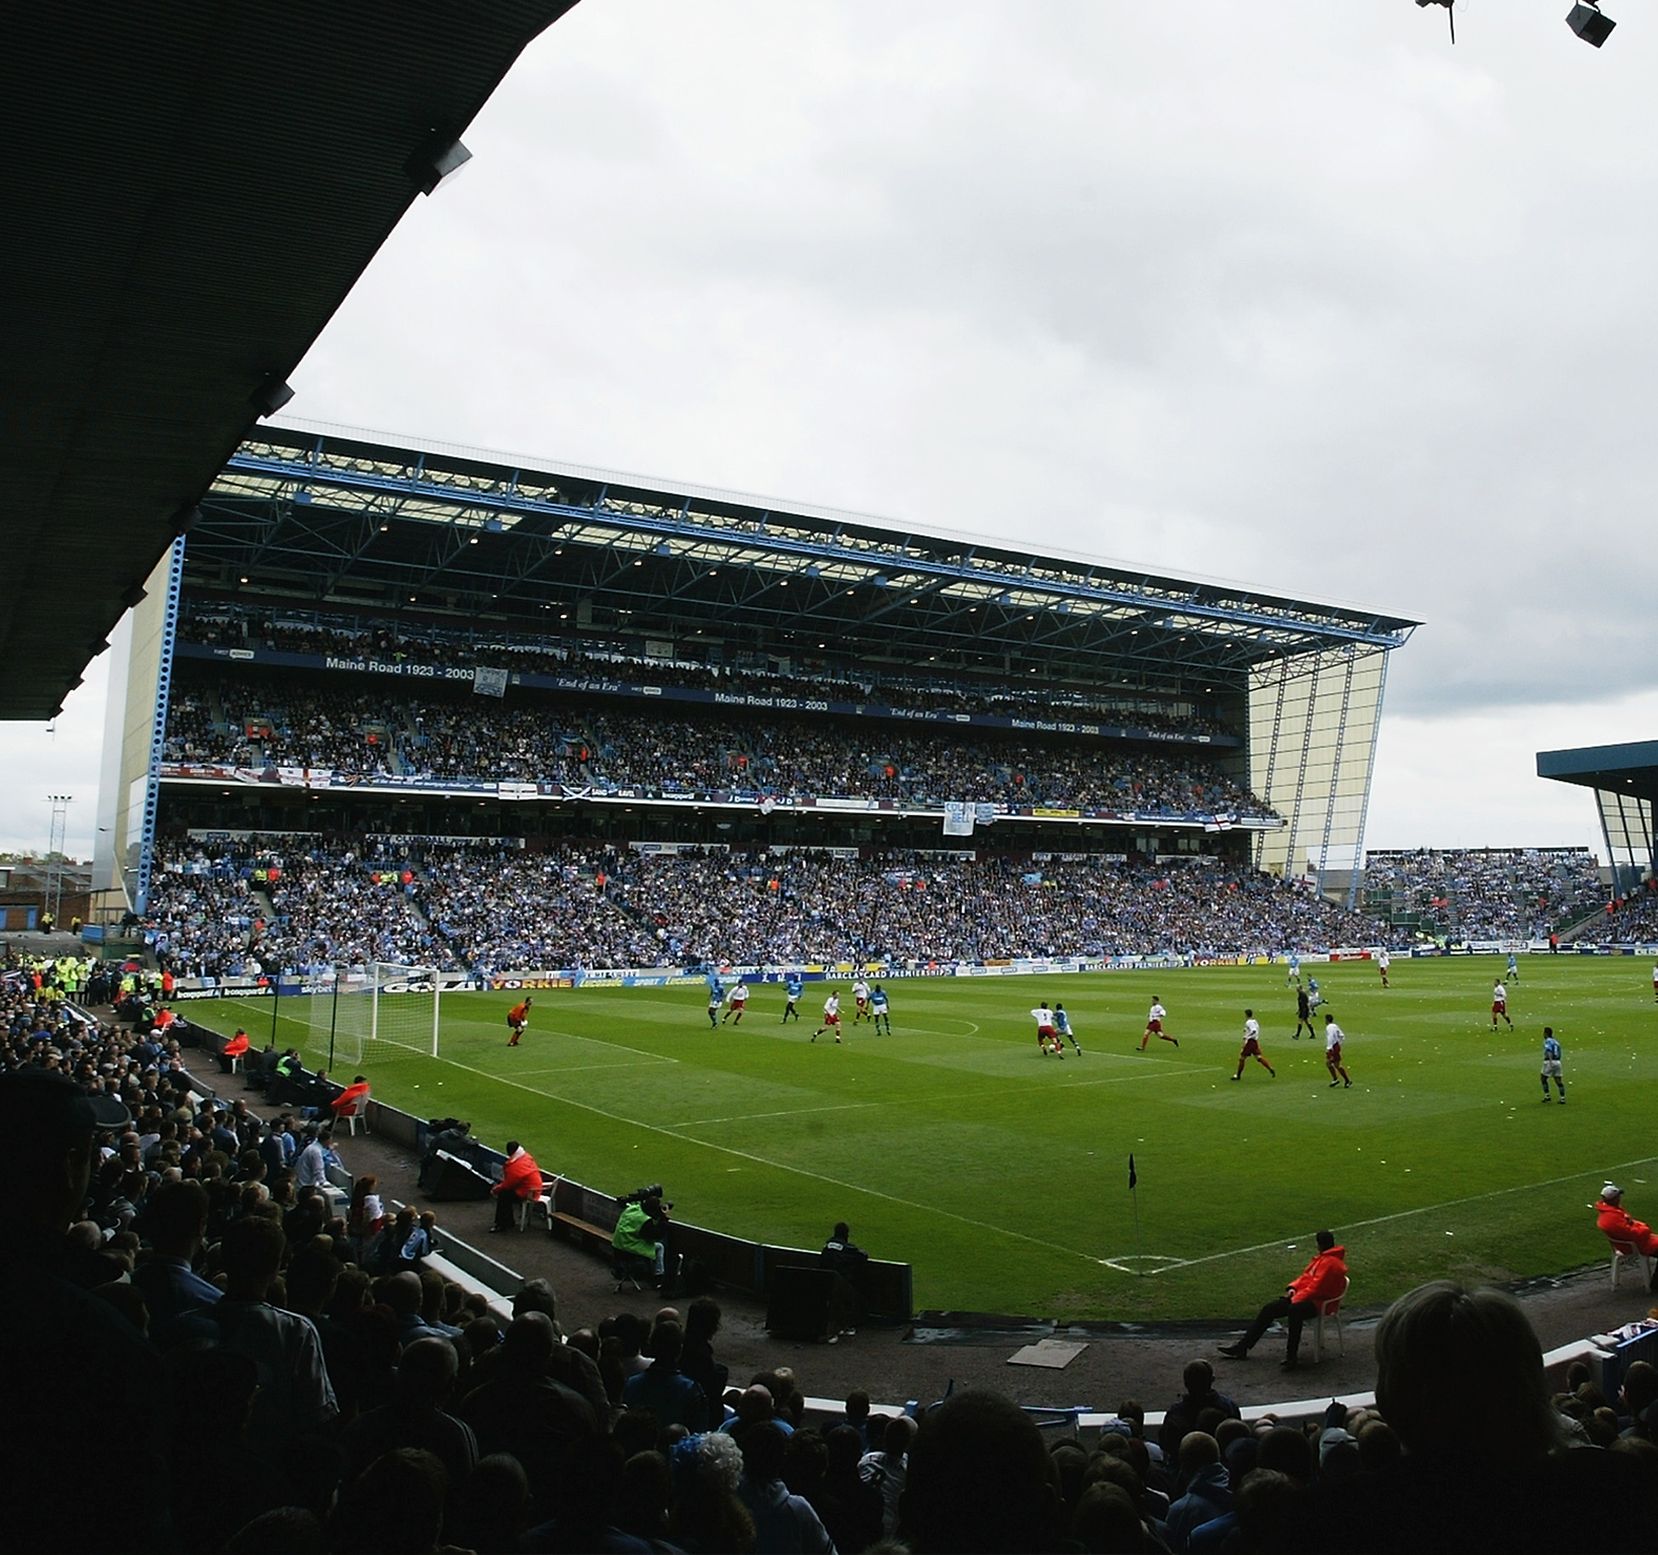 Maine Road, Manchester